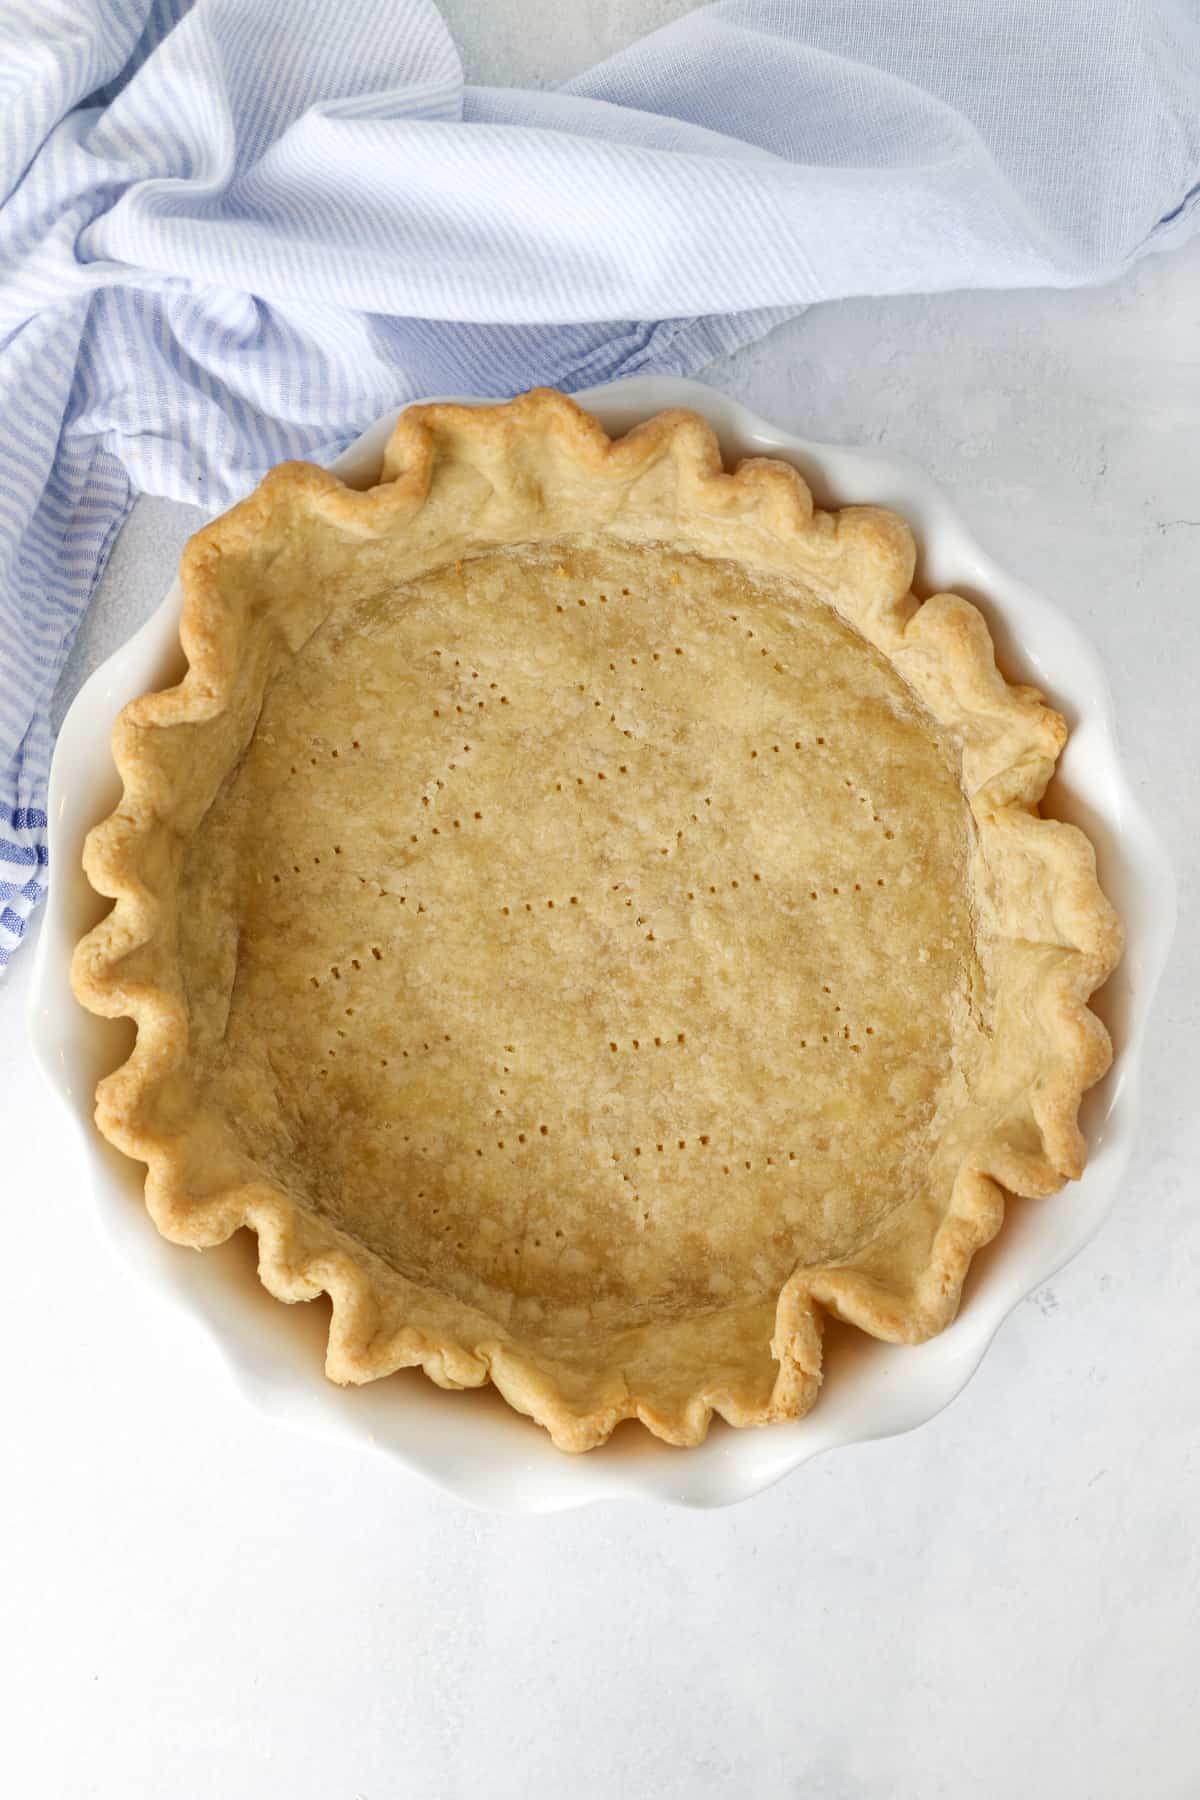 Overhead view of a fully baked pie crust in a pe plate.